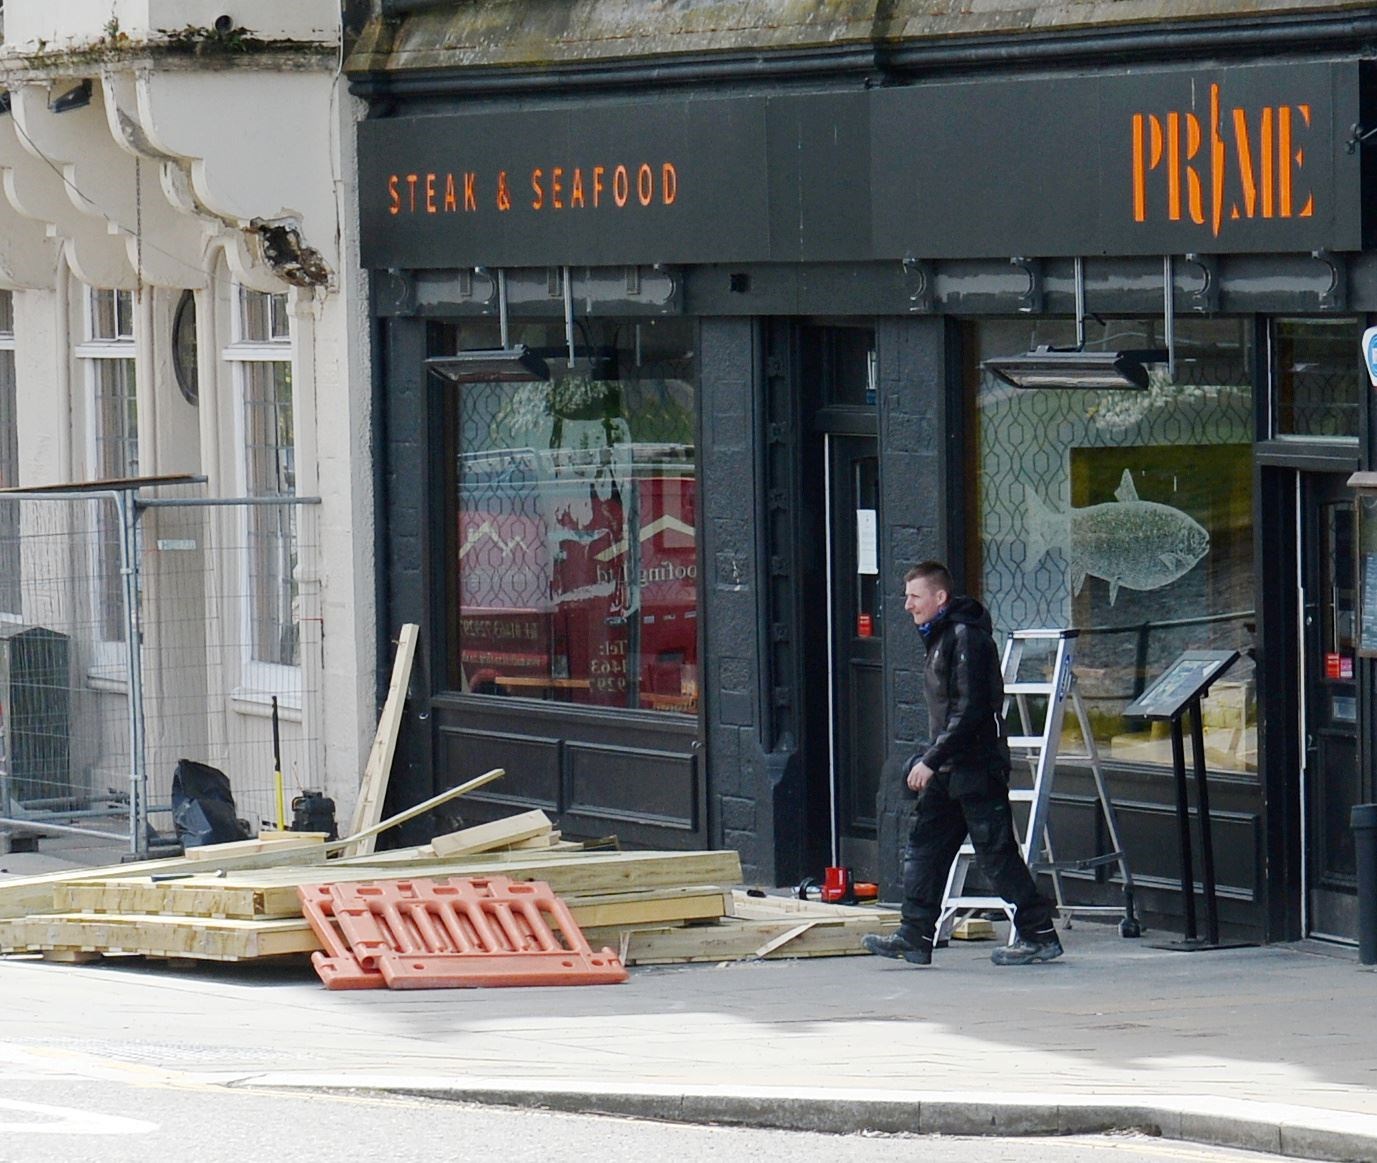 The outdoor seating area has now been dismantled.